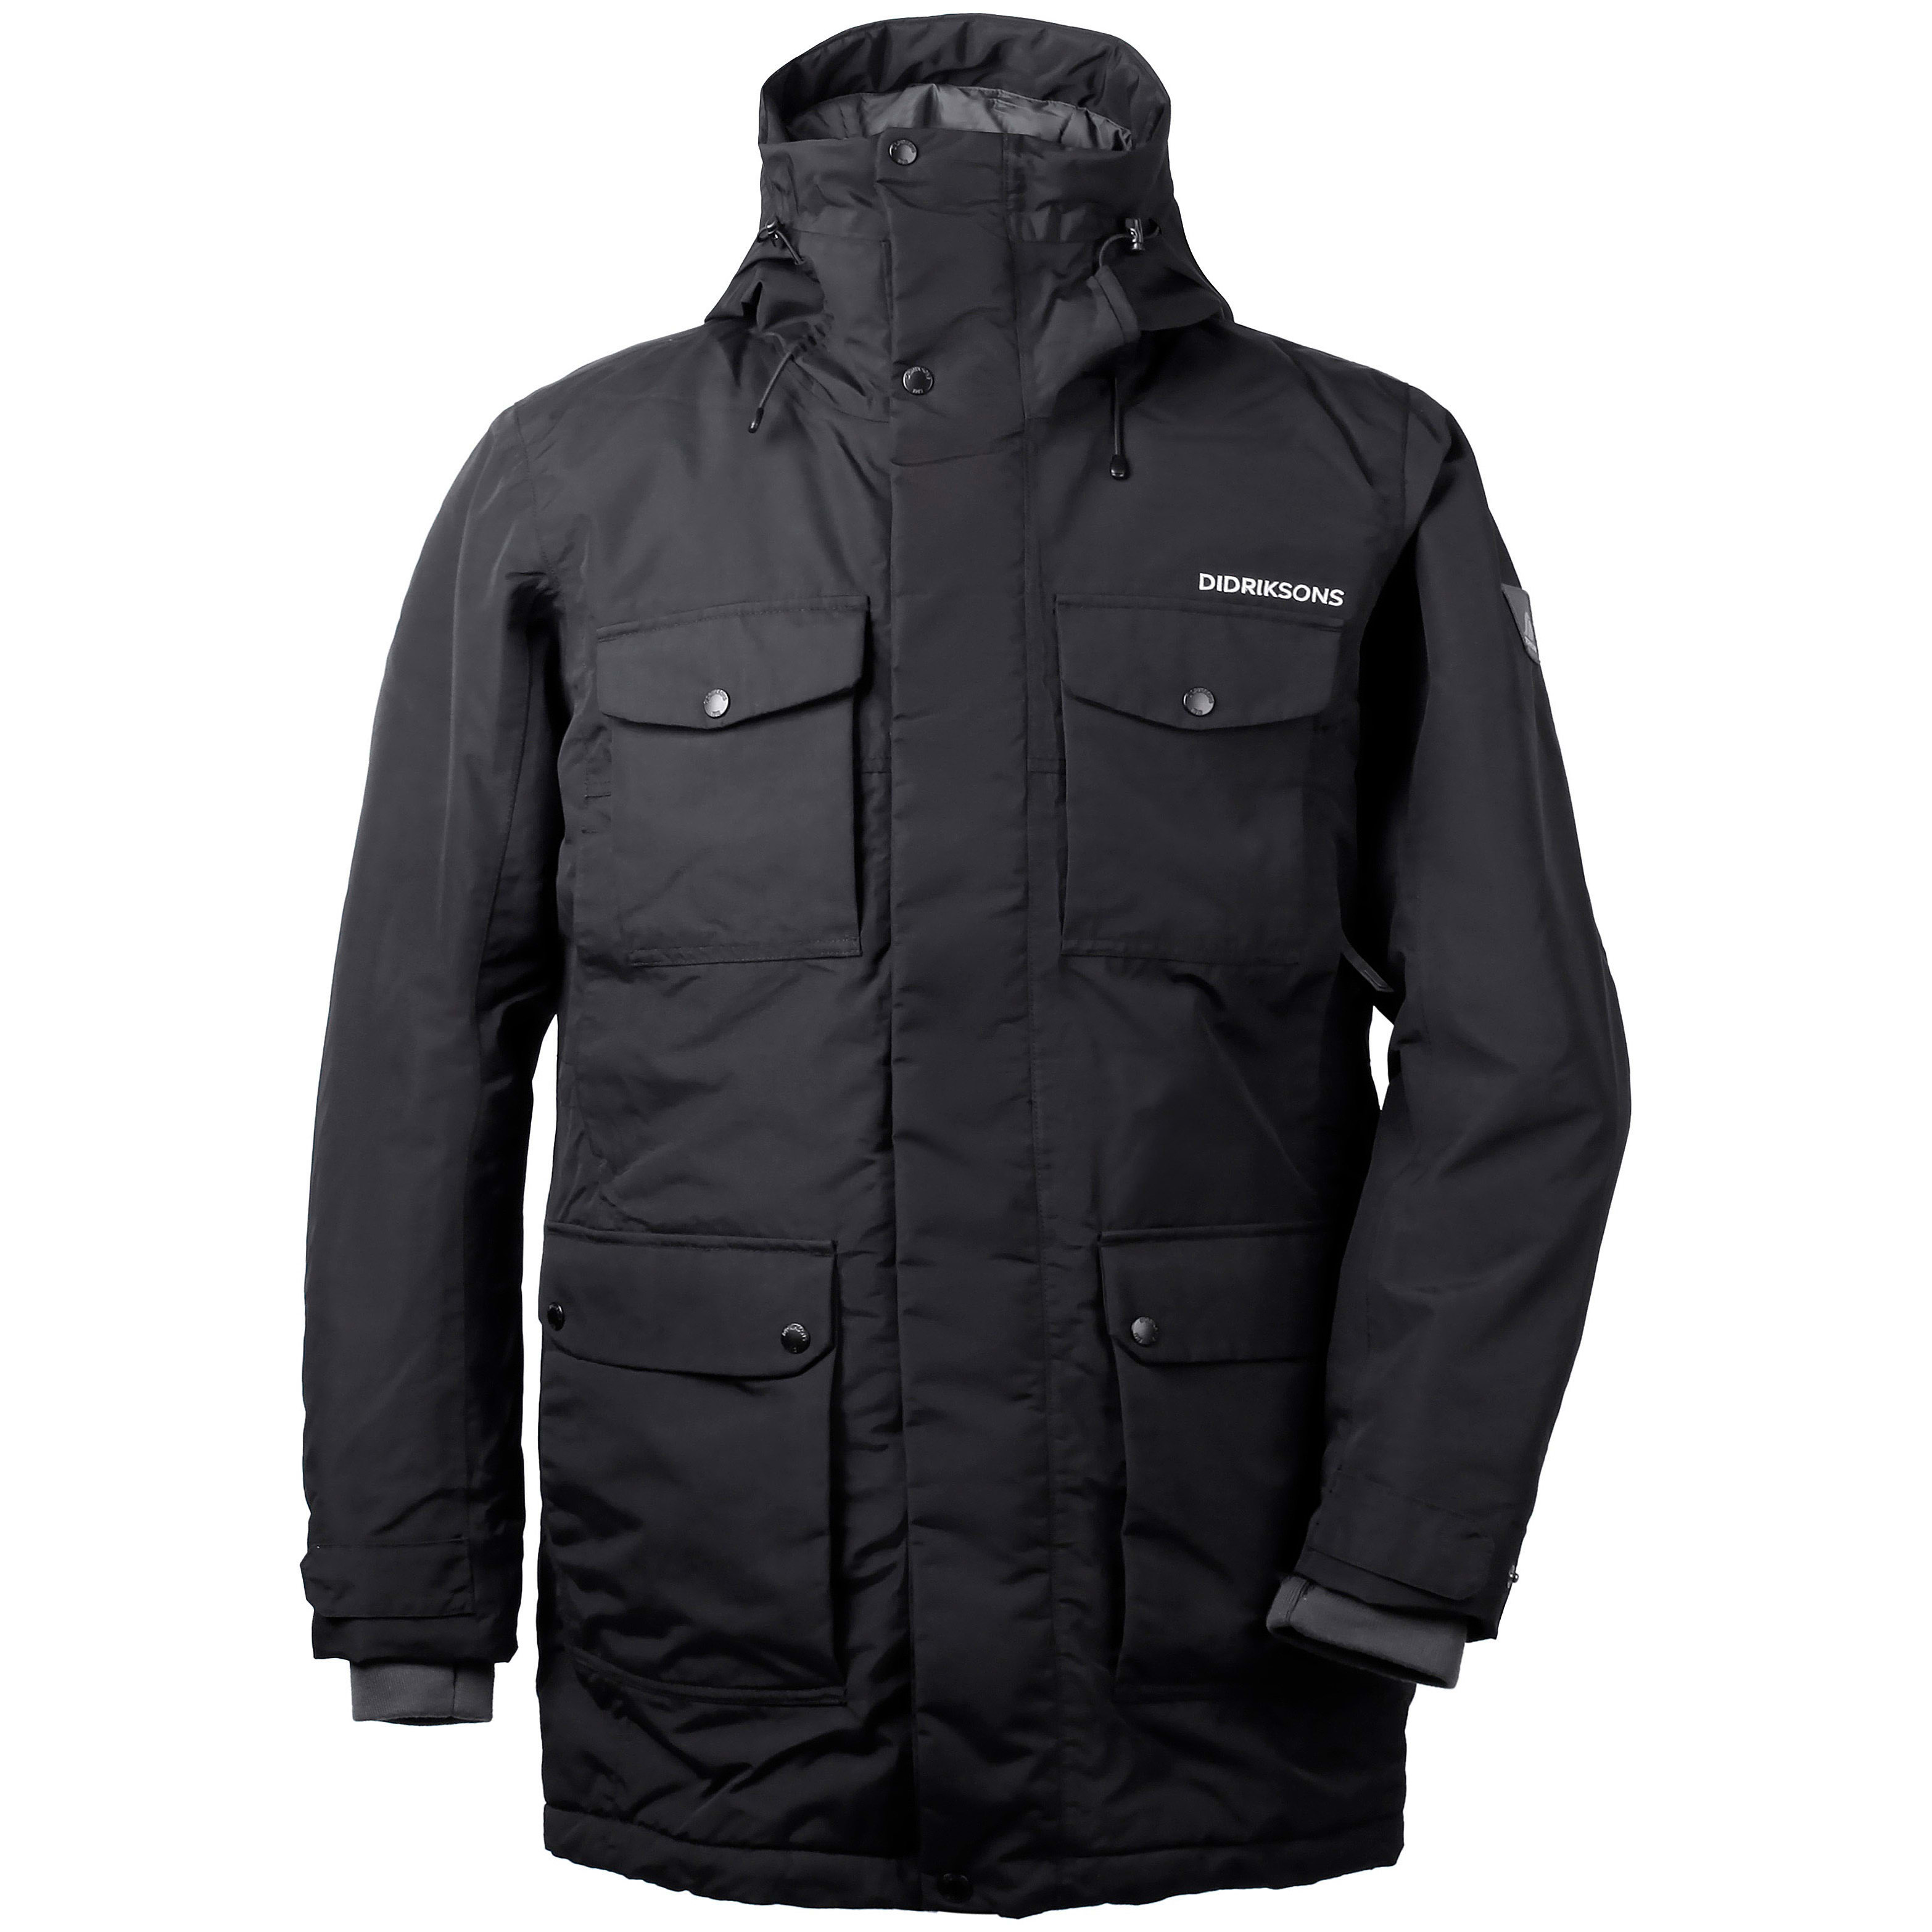 Buy Didriksons Drew Men's Parka from Outnorth